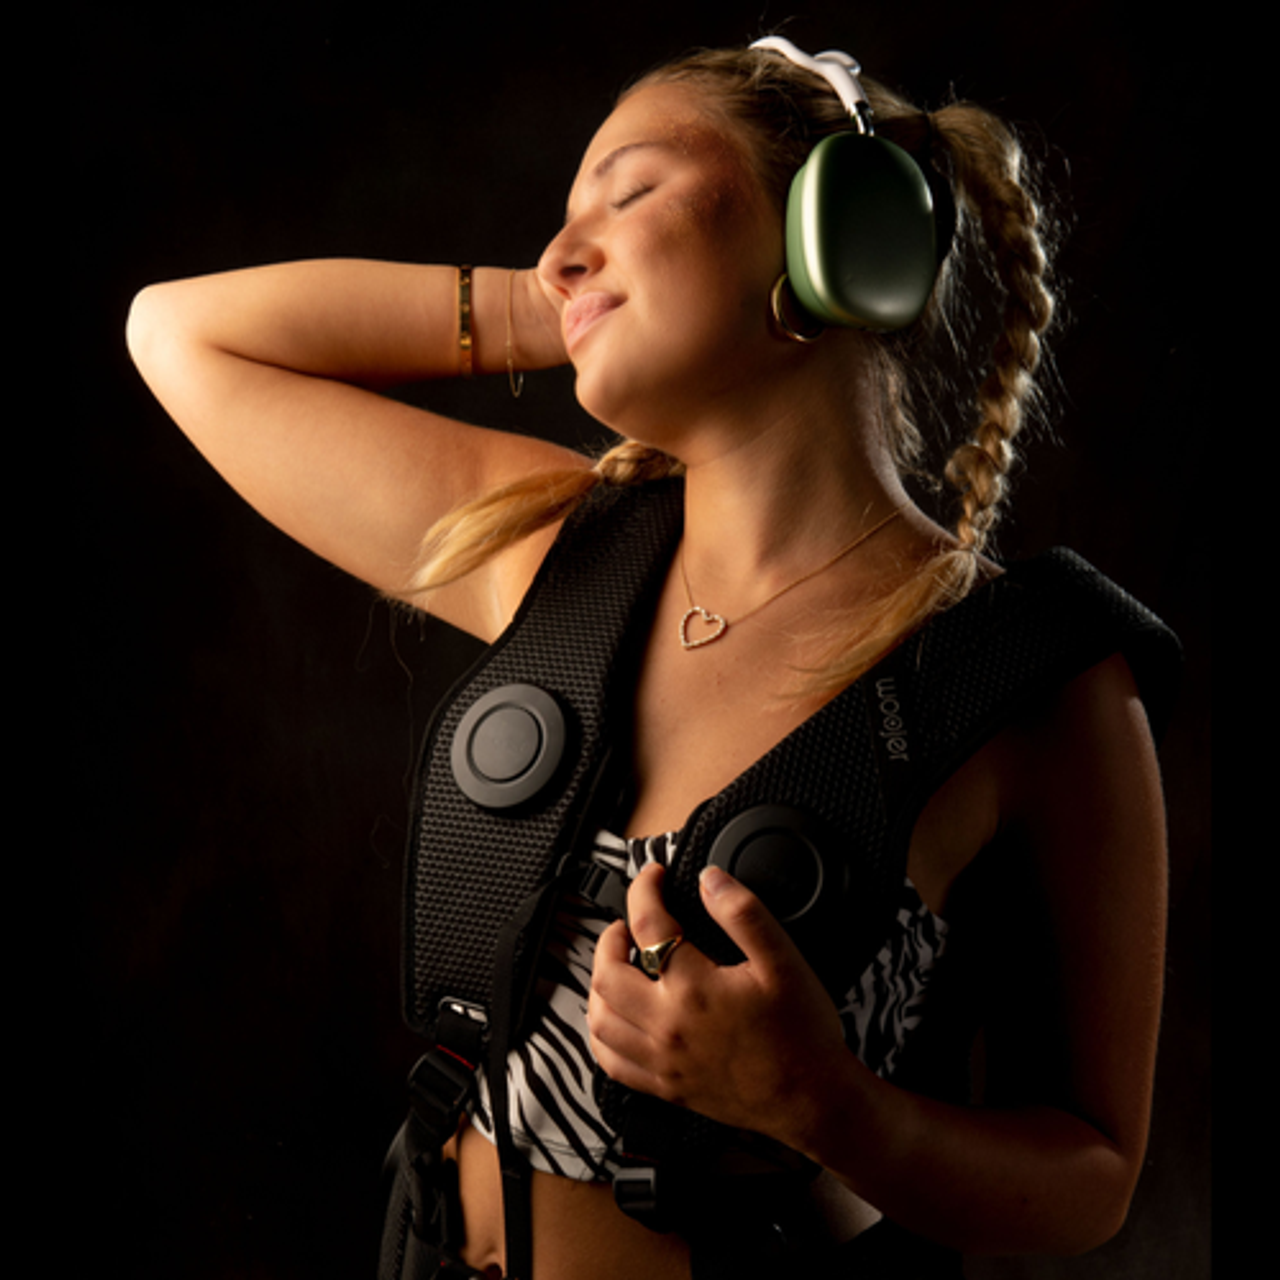 Woojer - Haptic Vest 3 for Games, Music, Movies, VR and Wellness. - Black